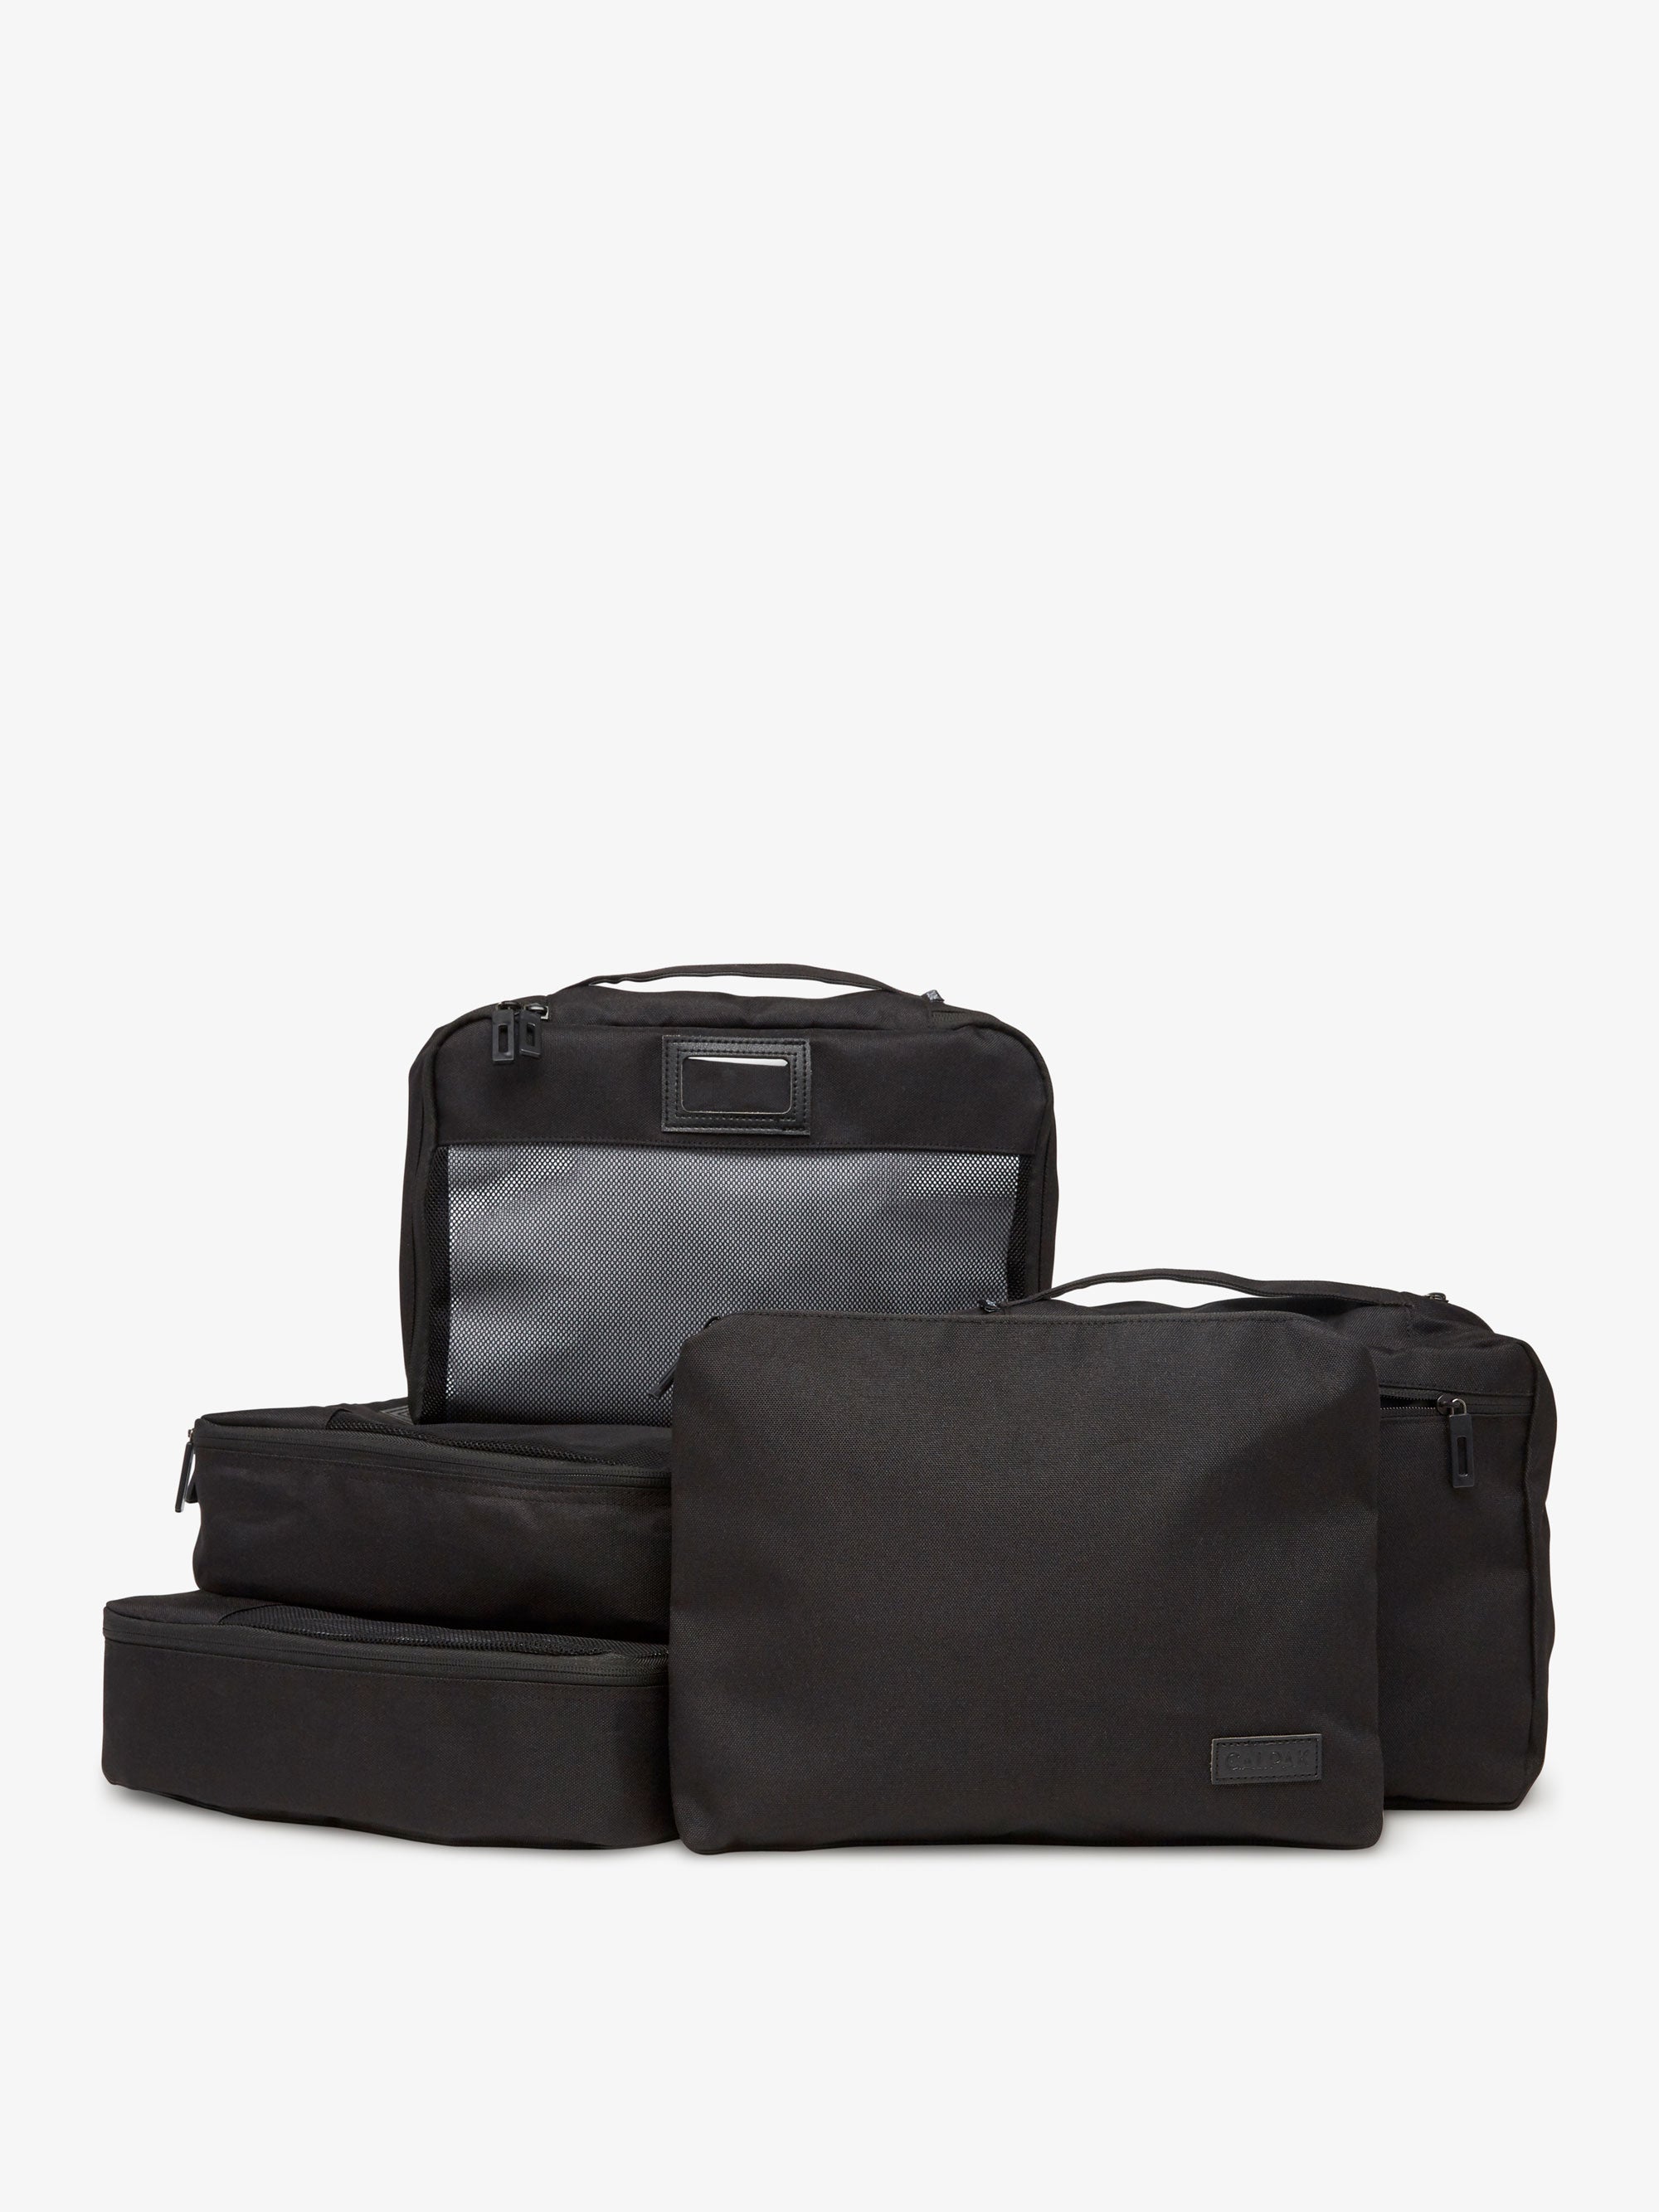 Black luggage organizers for travel and storage